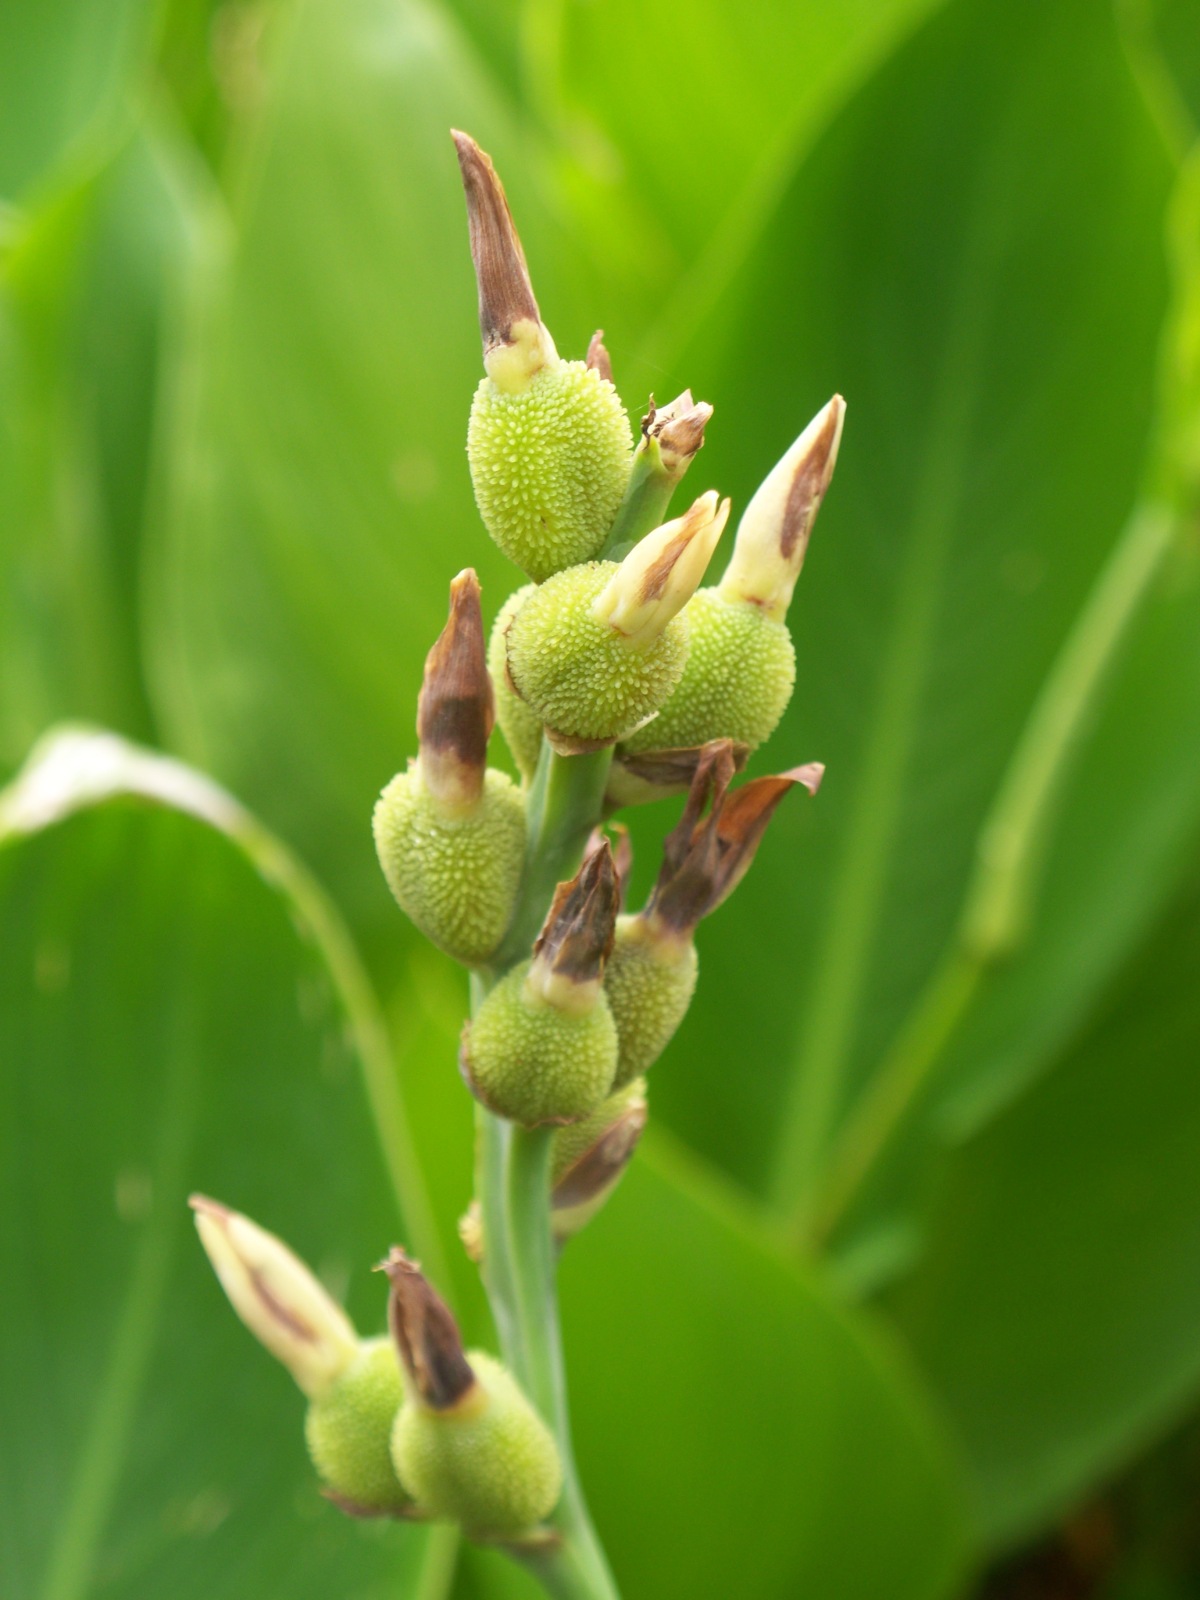 Canna Lily Seed Pods